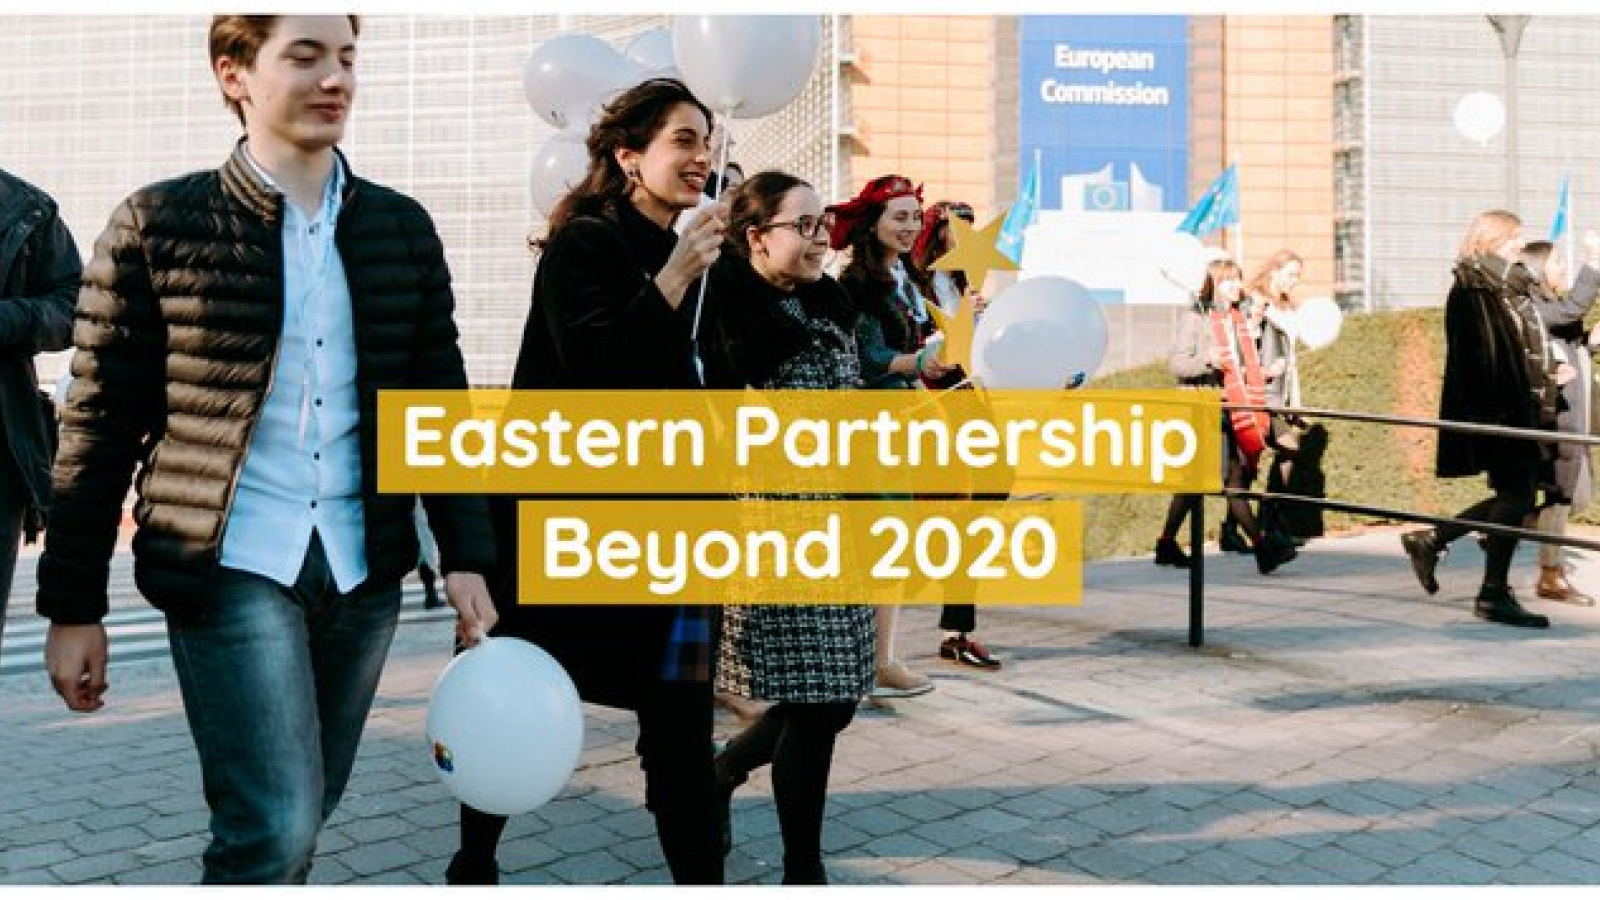 European Council approves conclusions on Eastern Partnership policy beyond 2020